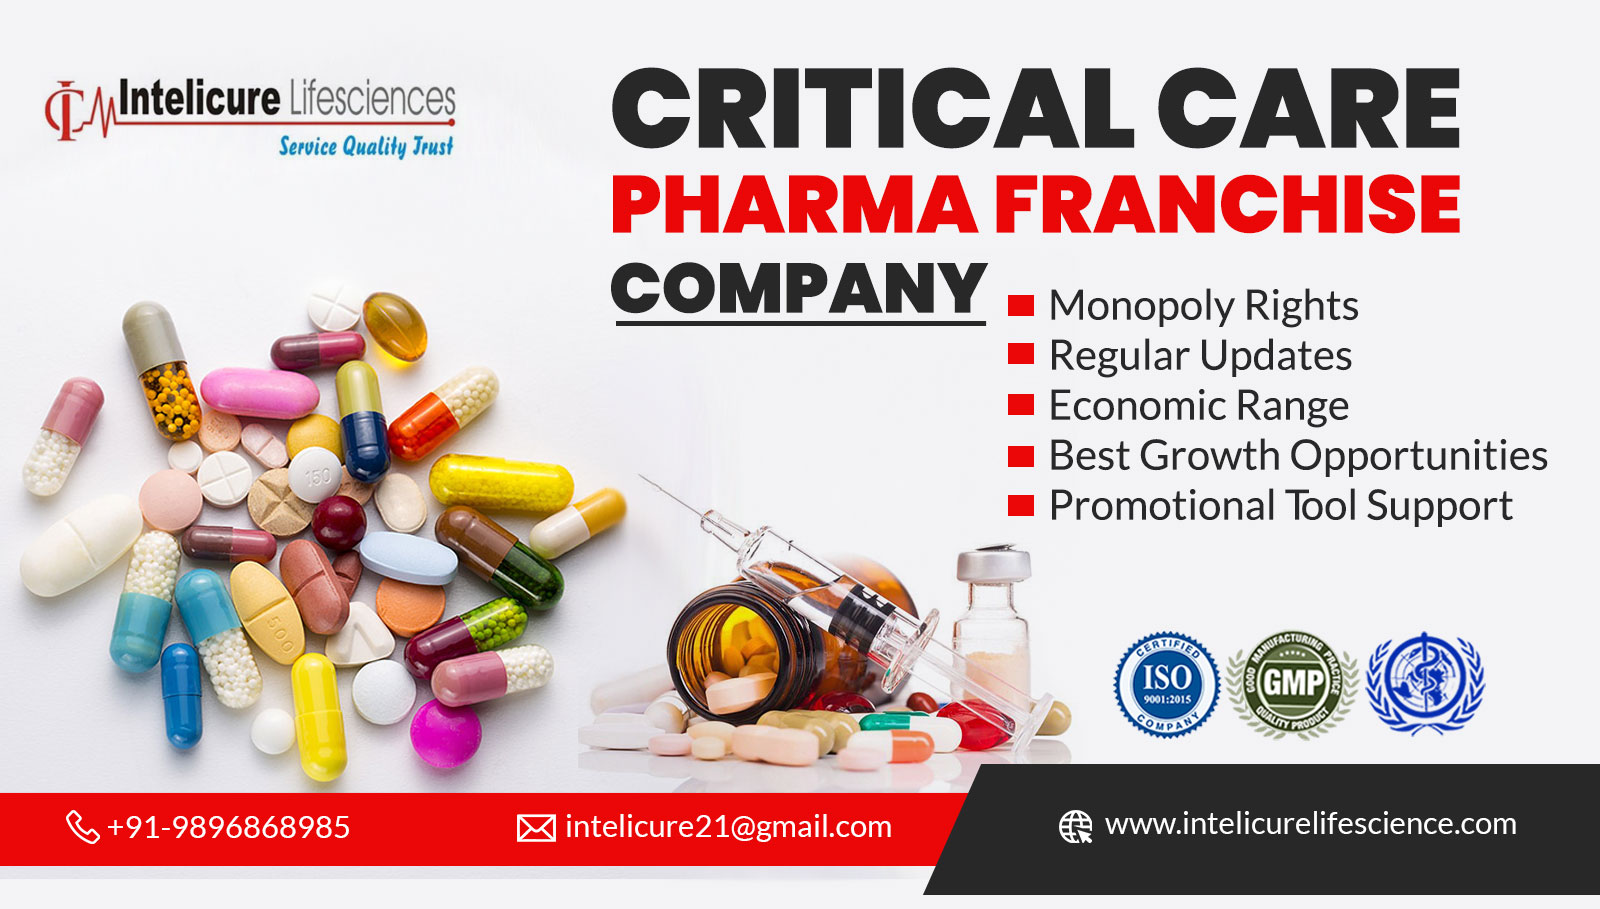 Right Critical Care Pharma Franchise Company to Invest in India